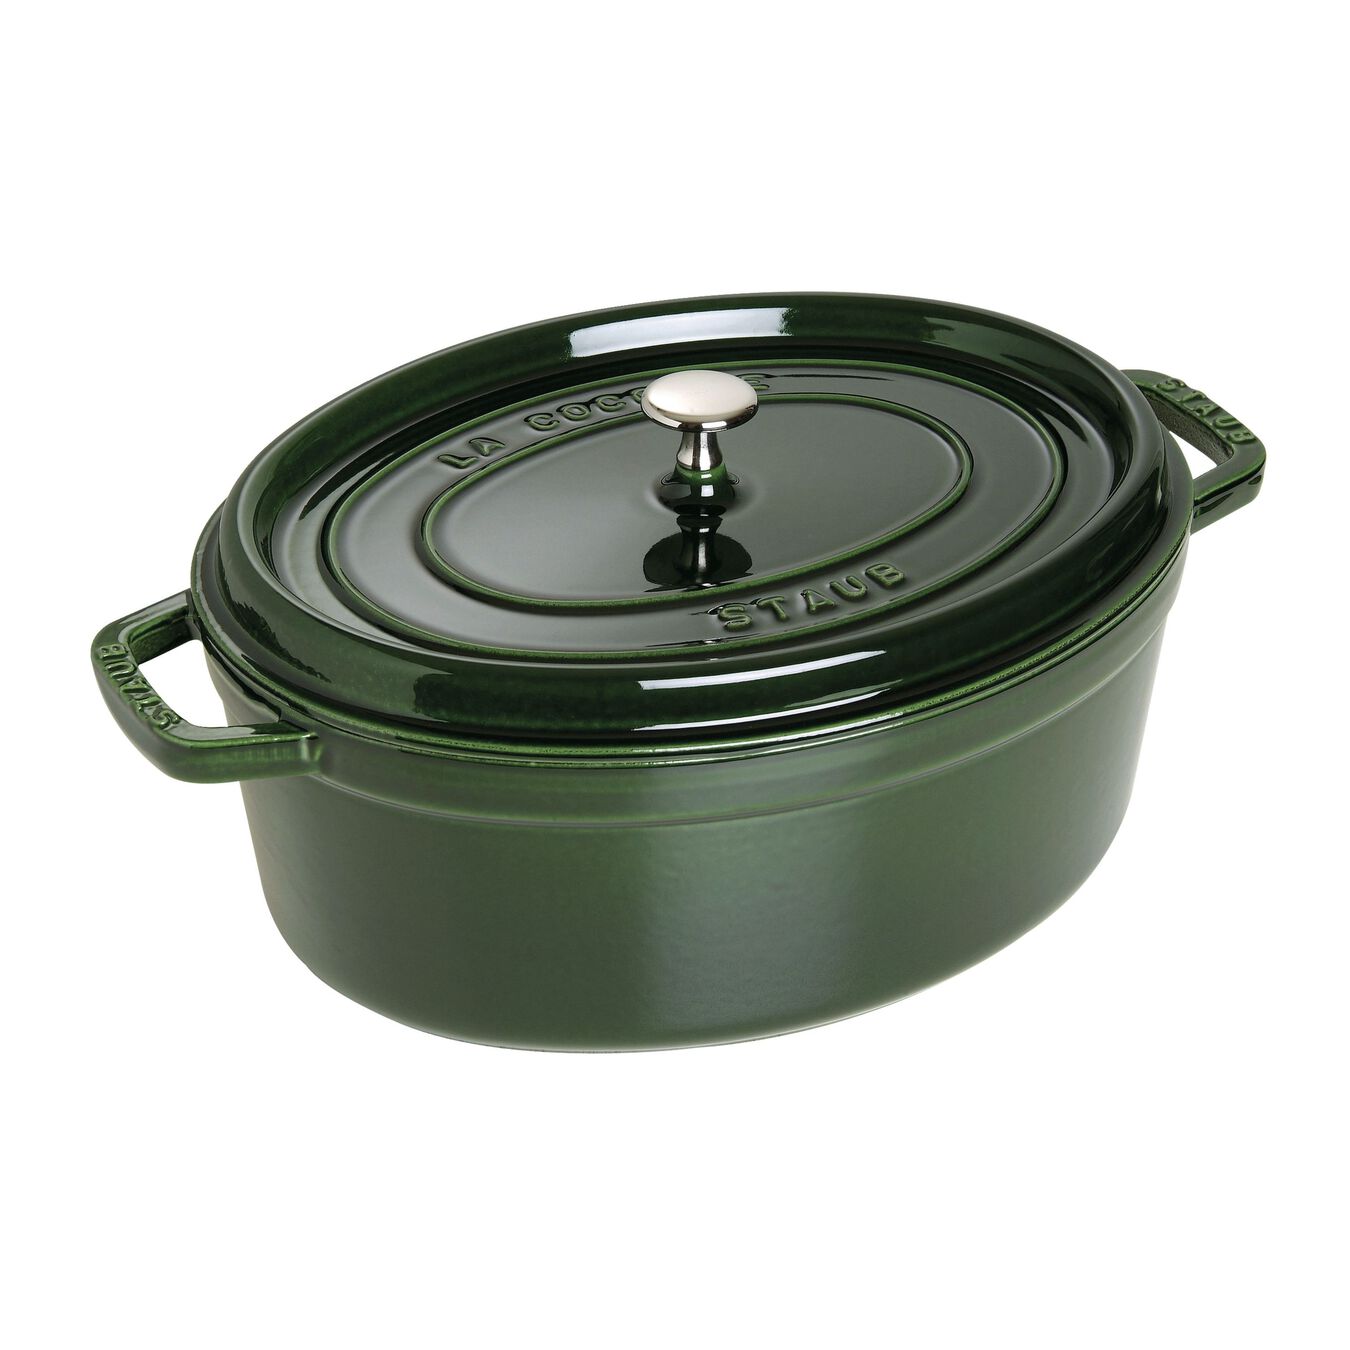 33 cm oval Cast iron Cocotte basil-green,,large 1